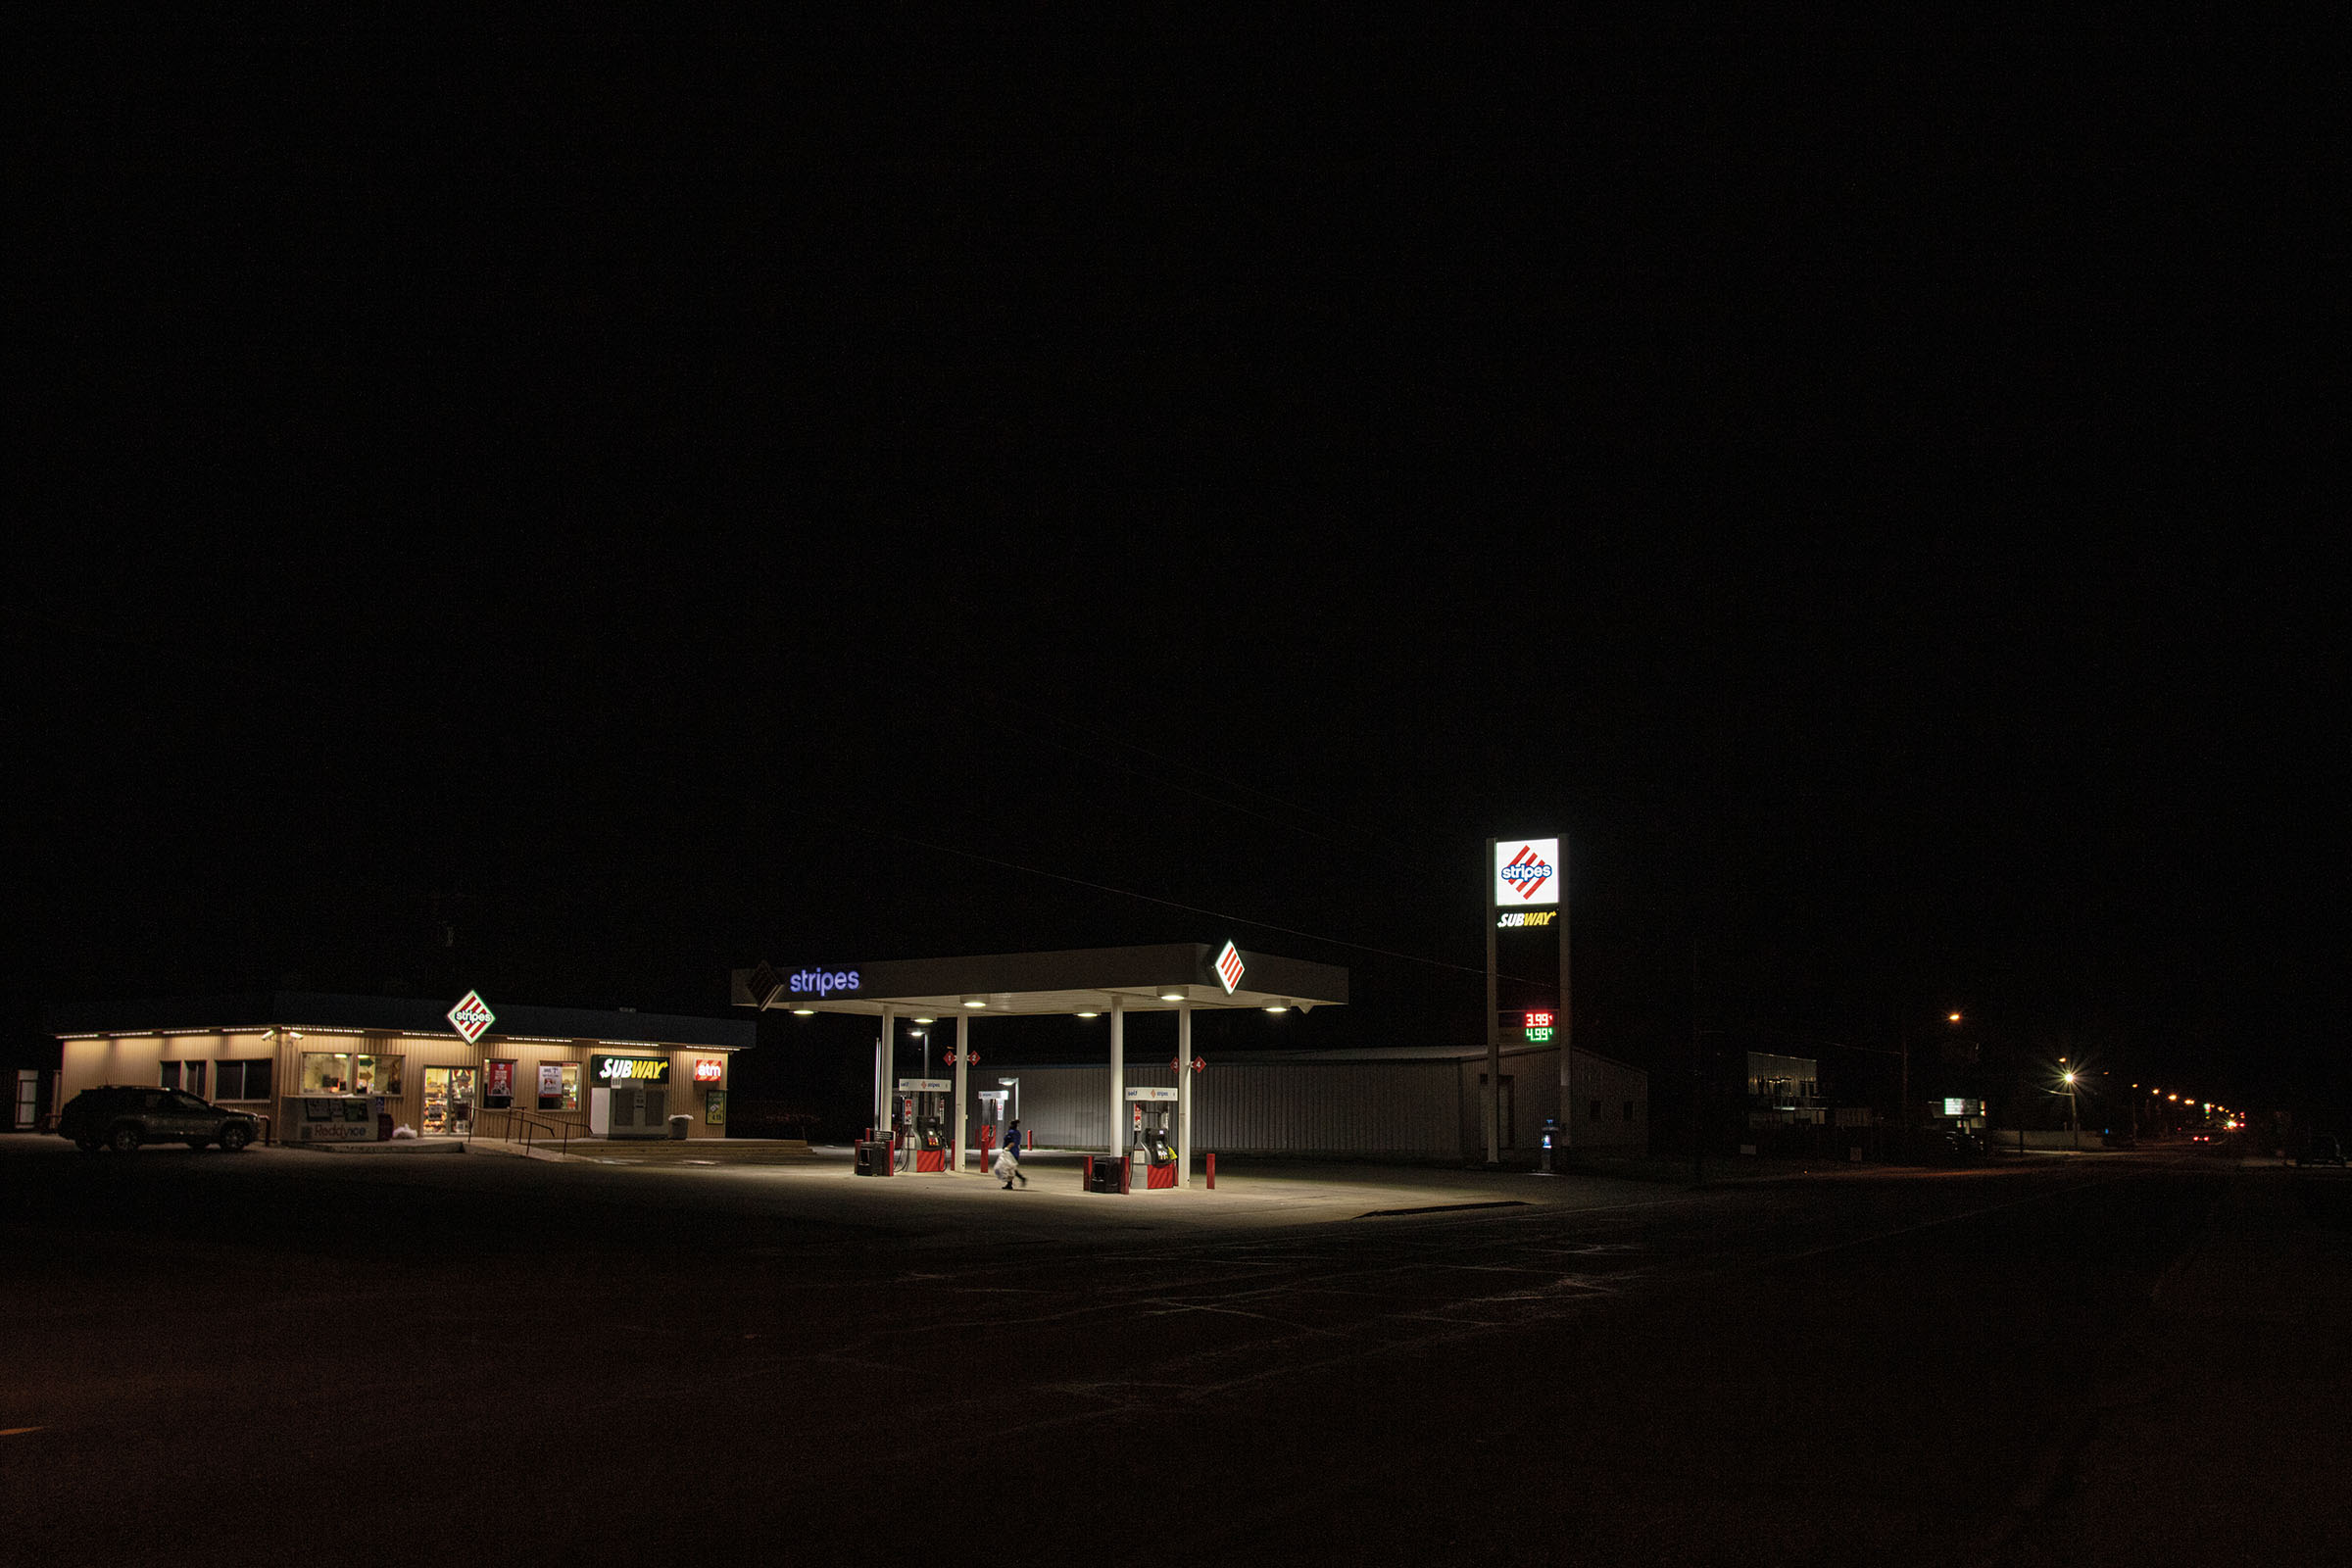 The exterior of a Stripes gas station, the only light around in this nighttime scene